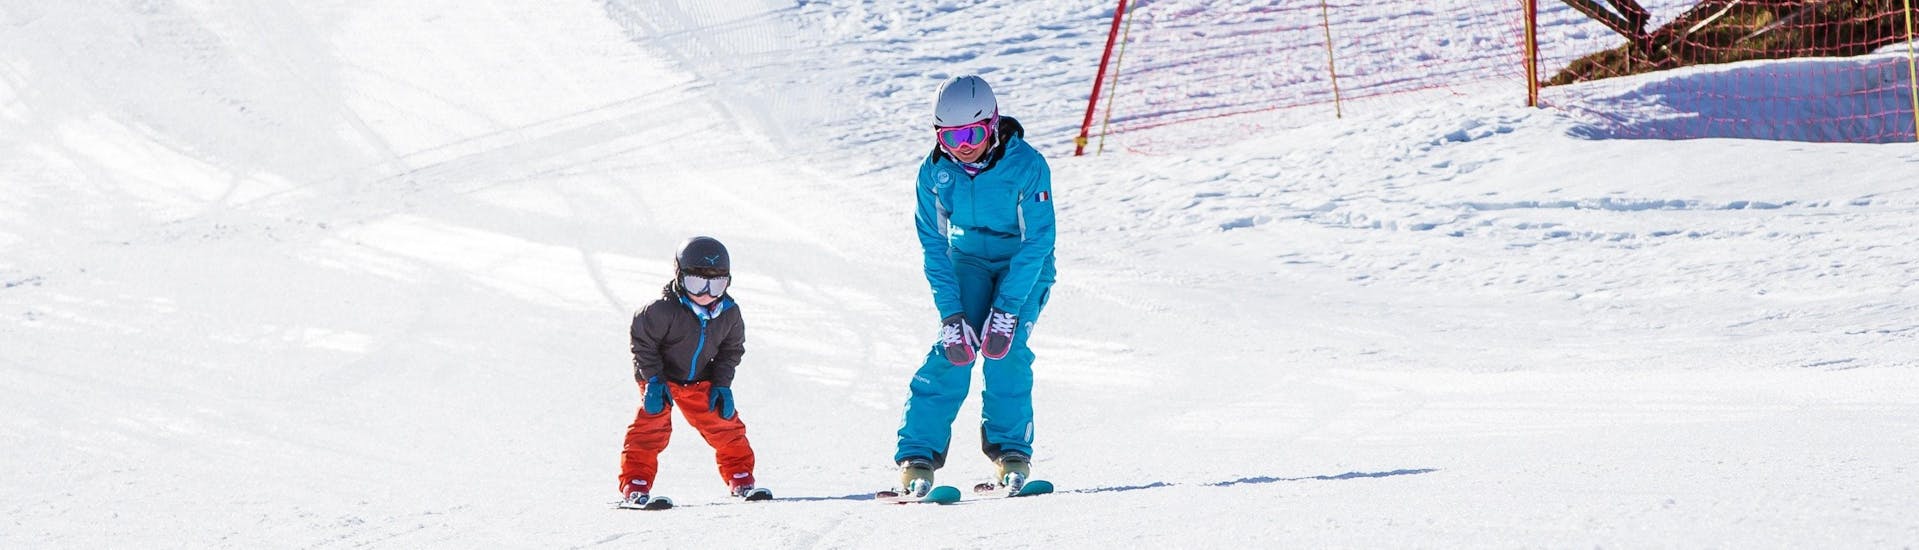 A young skier is gaining confidence on his skis alongside a ski instructor from the ski school ESI Ski Family in Val Thorens thanks to his Private Ski Lessons for Kids of All Levels - Morning.